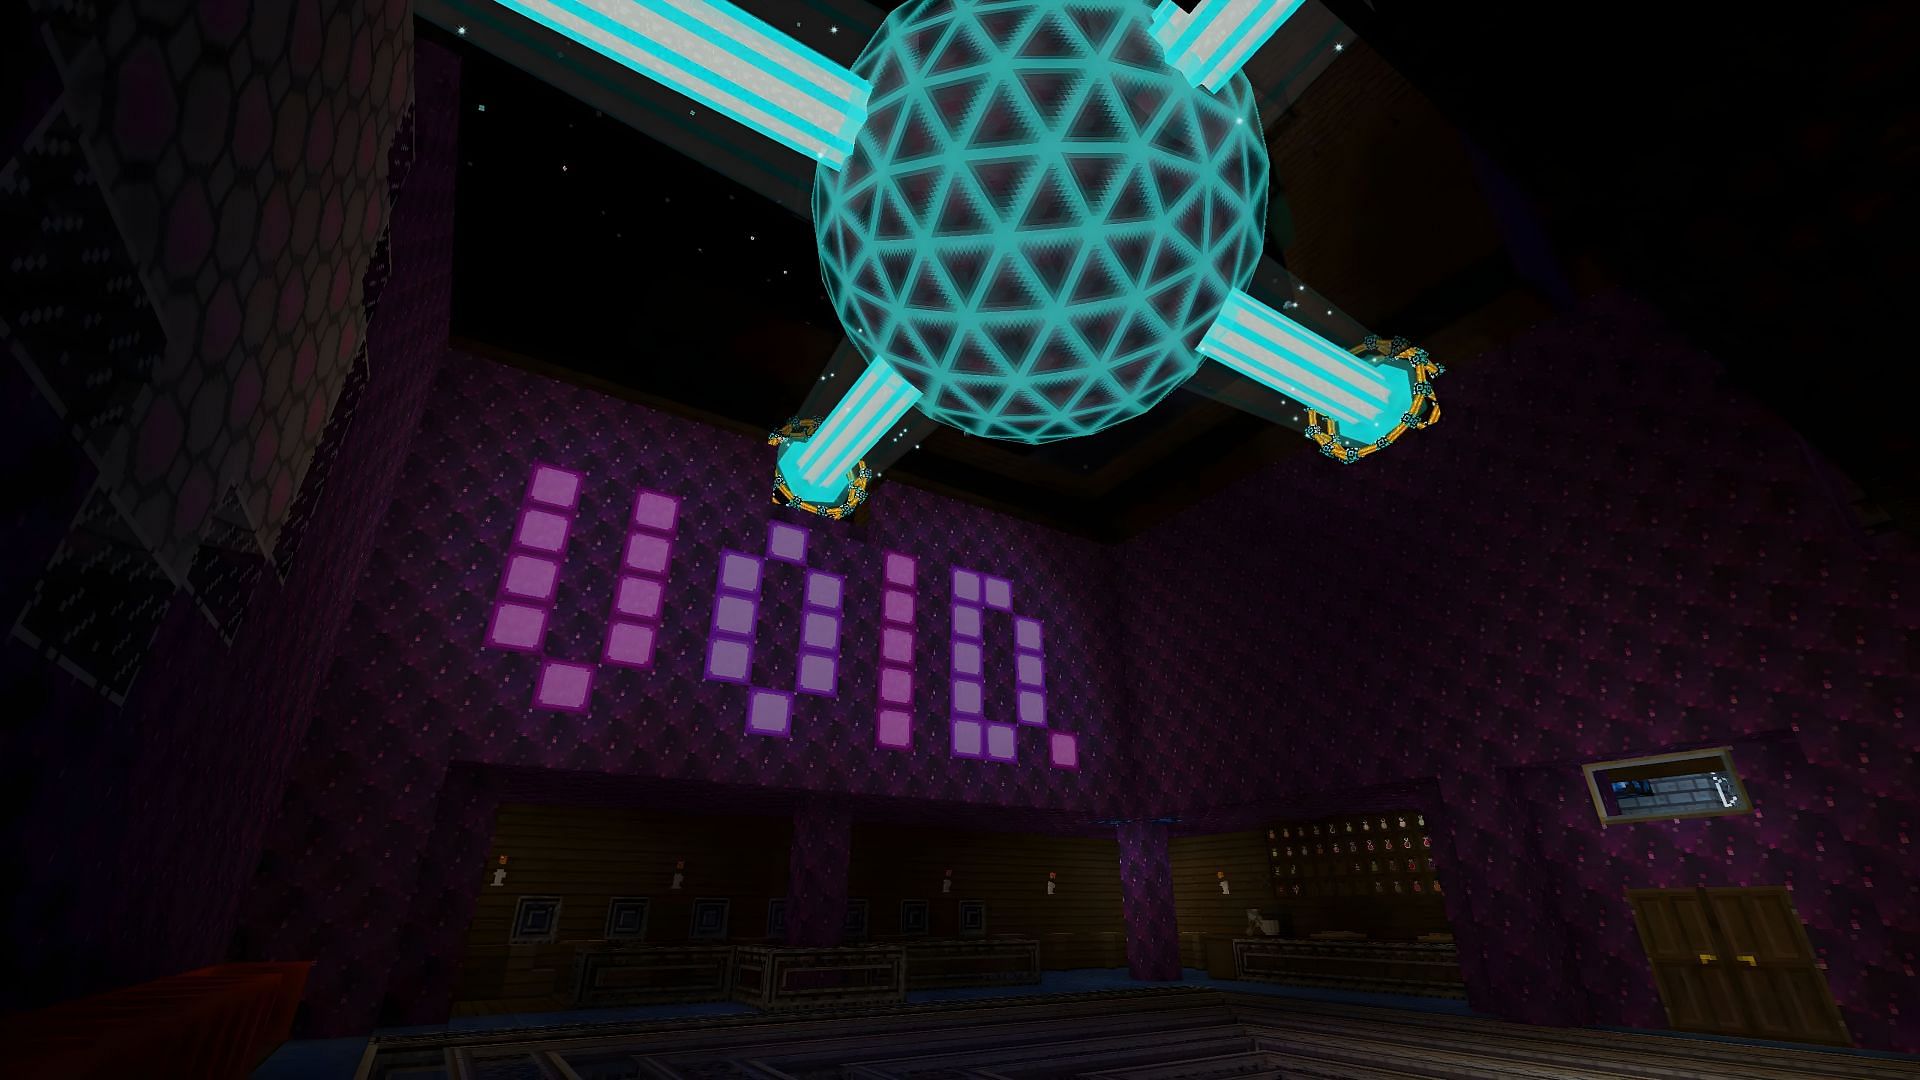 Minecraft Player Builds Incredible Map Room With Glass Floors